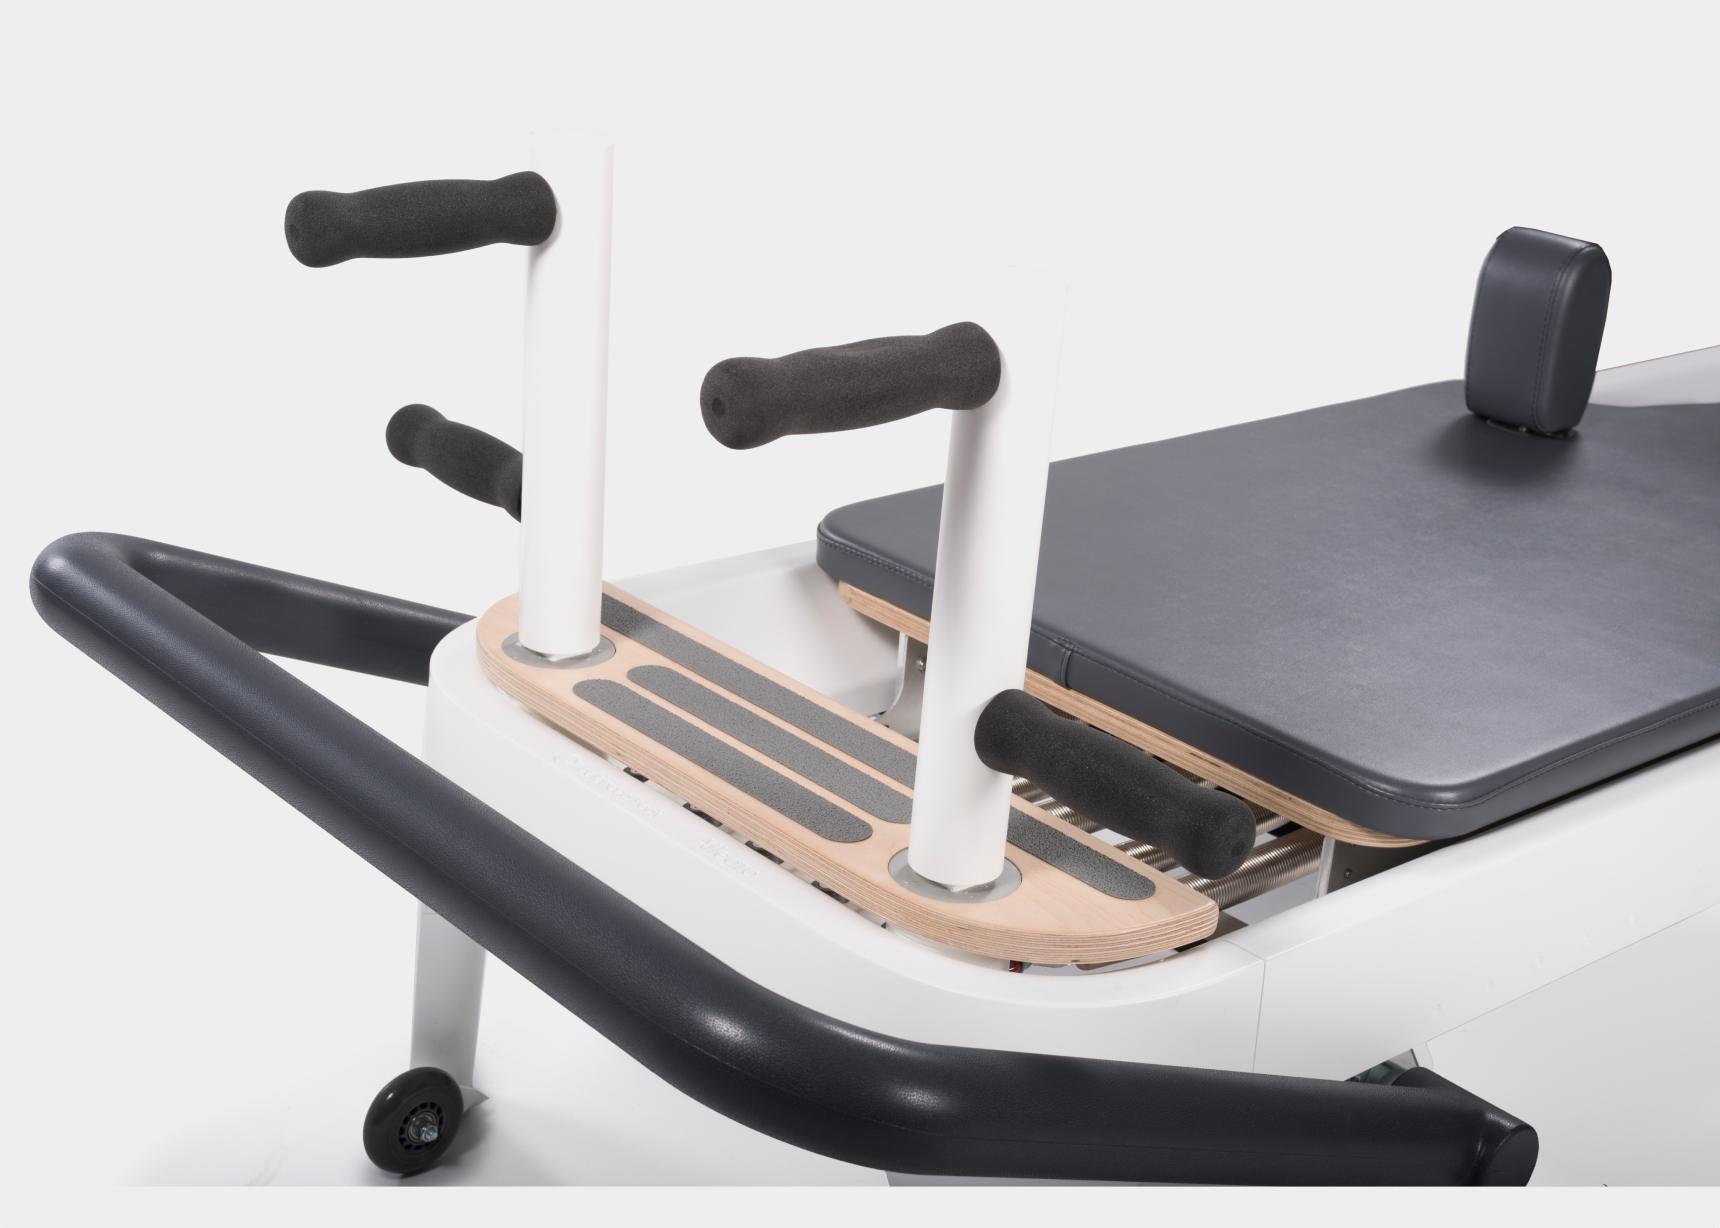 Our Founder began working on the Allegro 2 reformer over 10 years